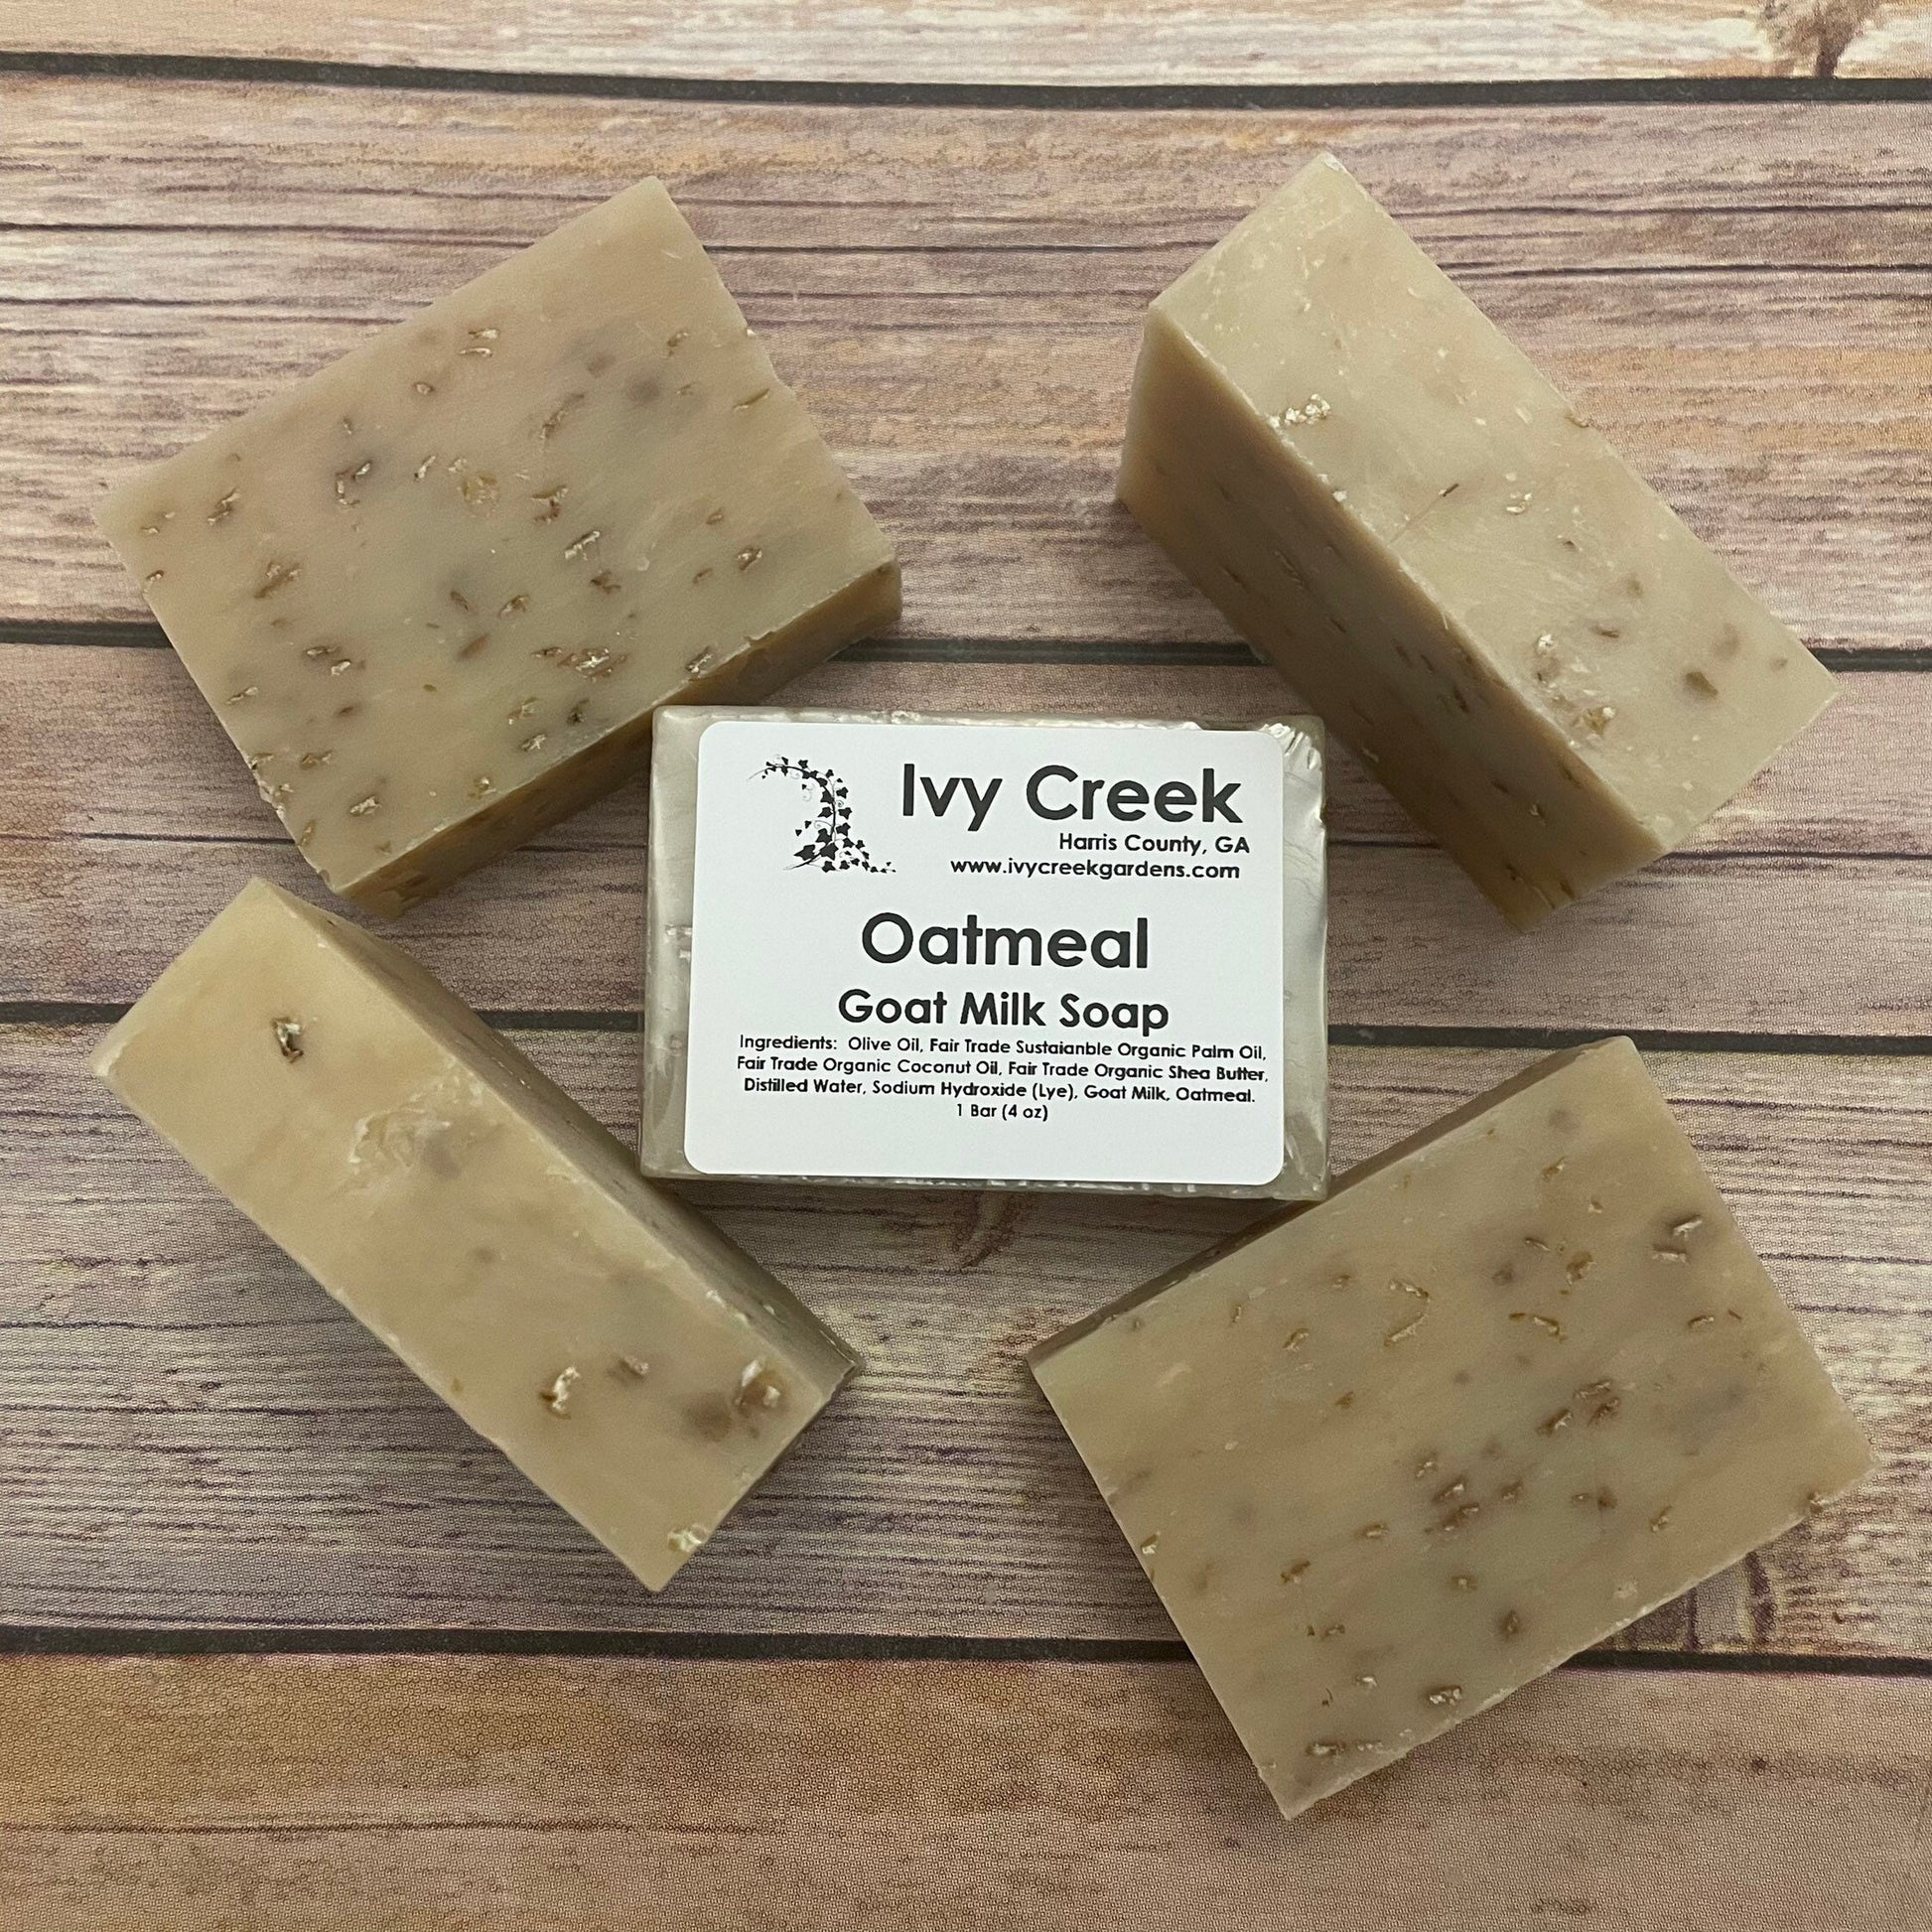 Ivy Creek Oatmeal Goat Milk Soap | Gentle and Unscented Natural Soap | Nourishing Soap Bar - 4 oz